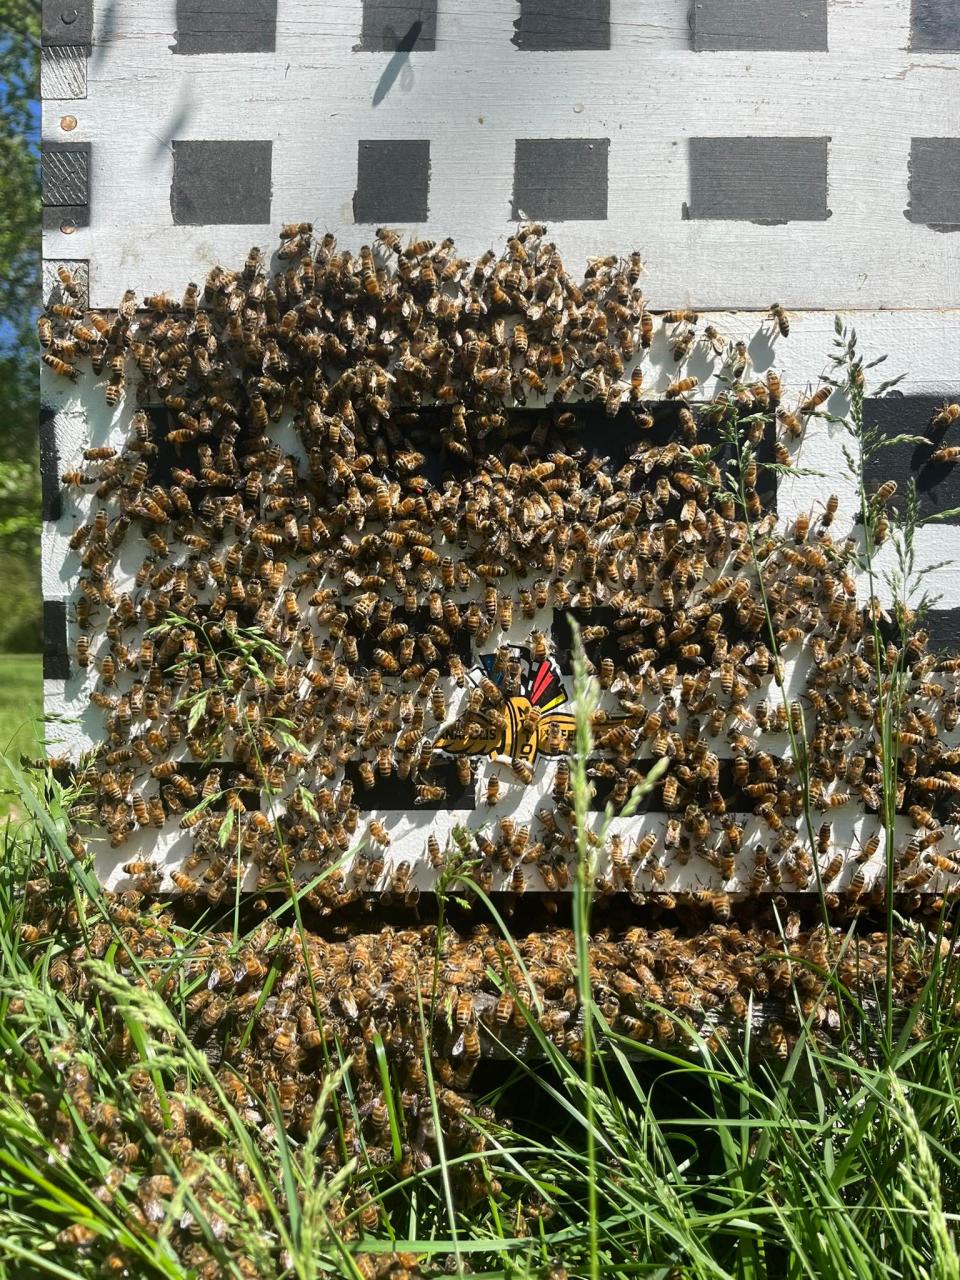 Bees that visited the Indianapolis Motor Speedway during the 2023 Indy 500 were transferred to a beekeeper's hive. The queen is still alive, and her hive is thriving. (Ross Harding / Courtesy photo)